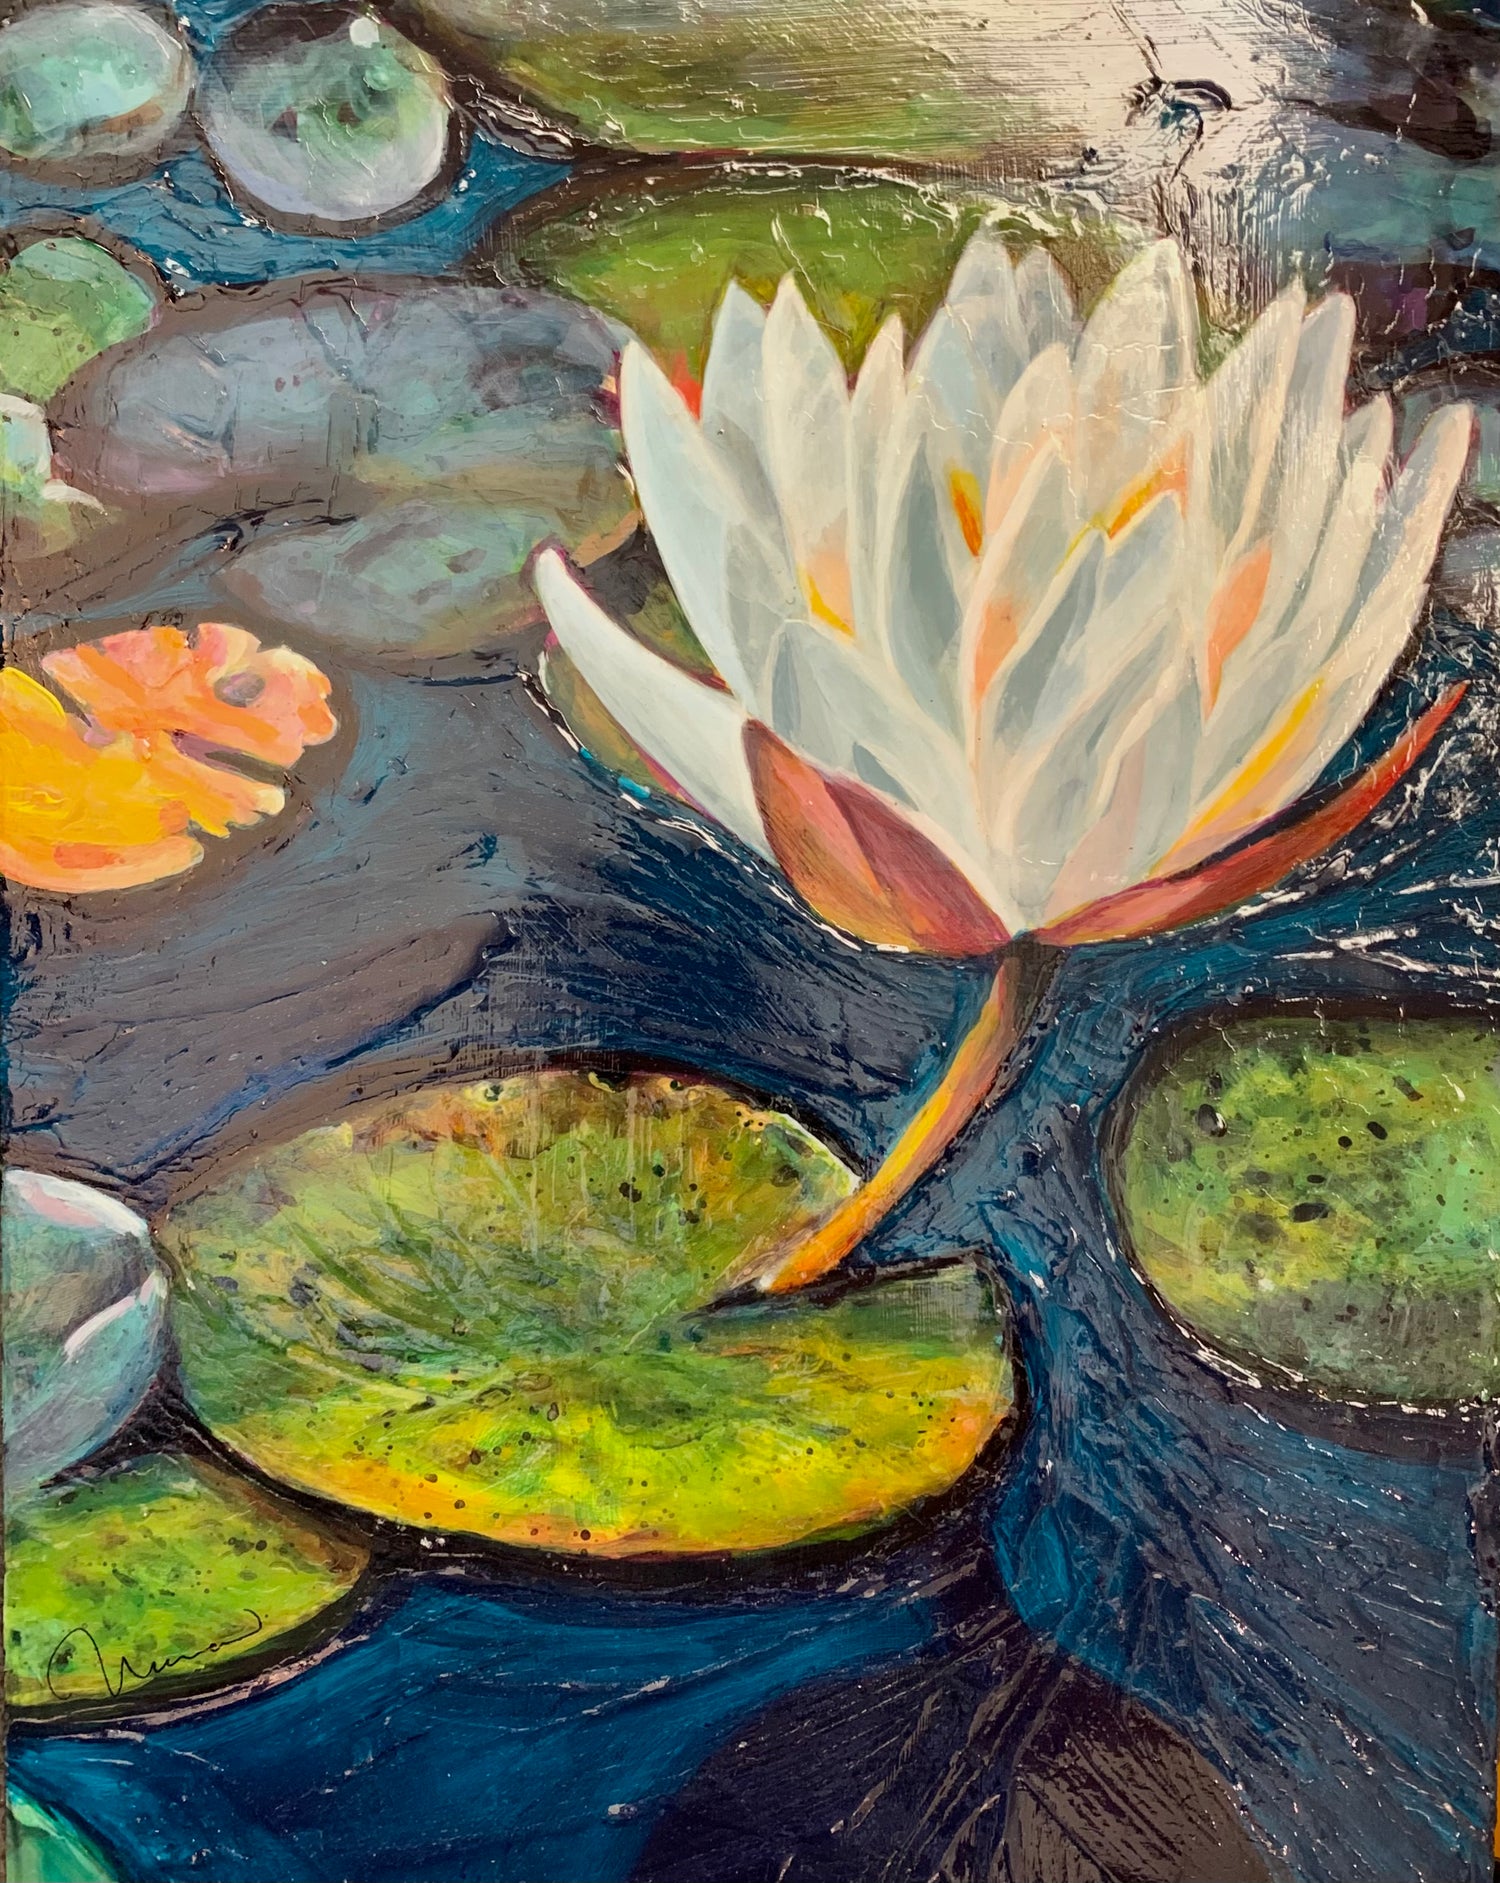 Waterlily in a pond.